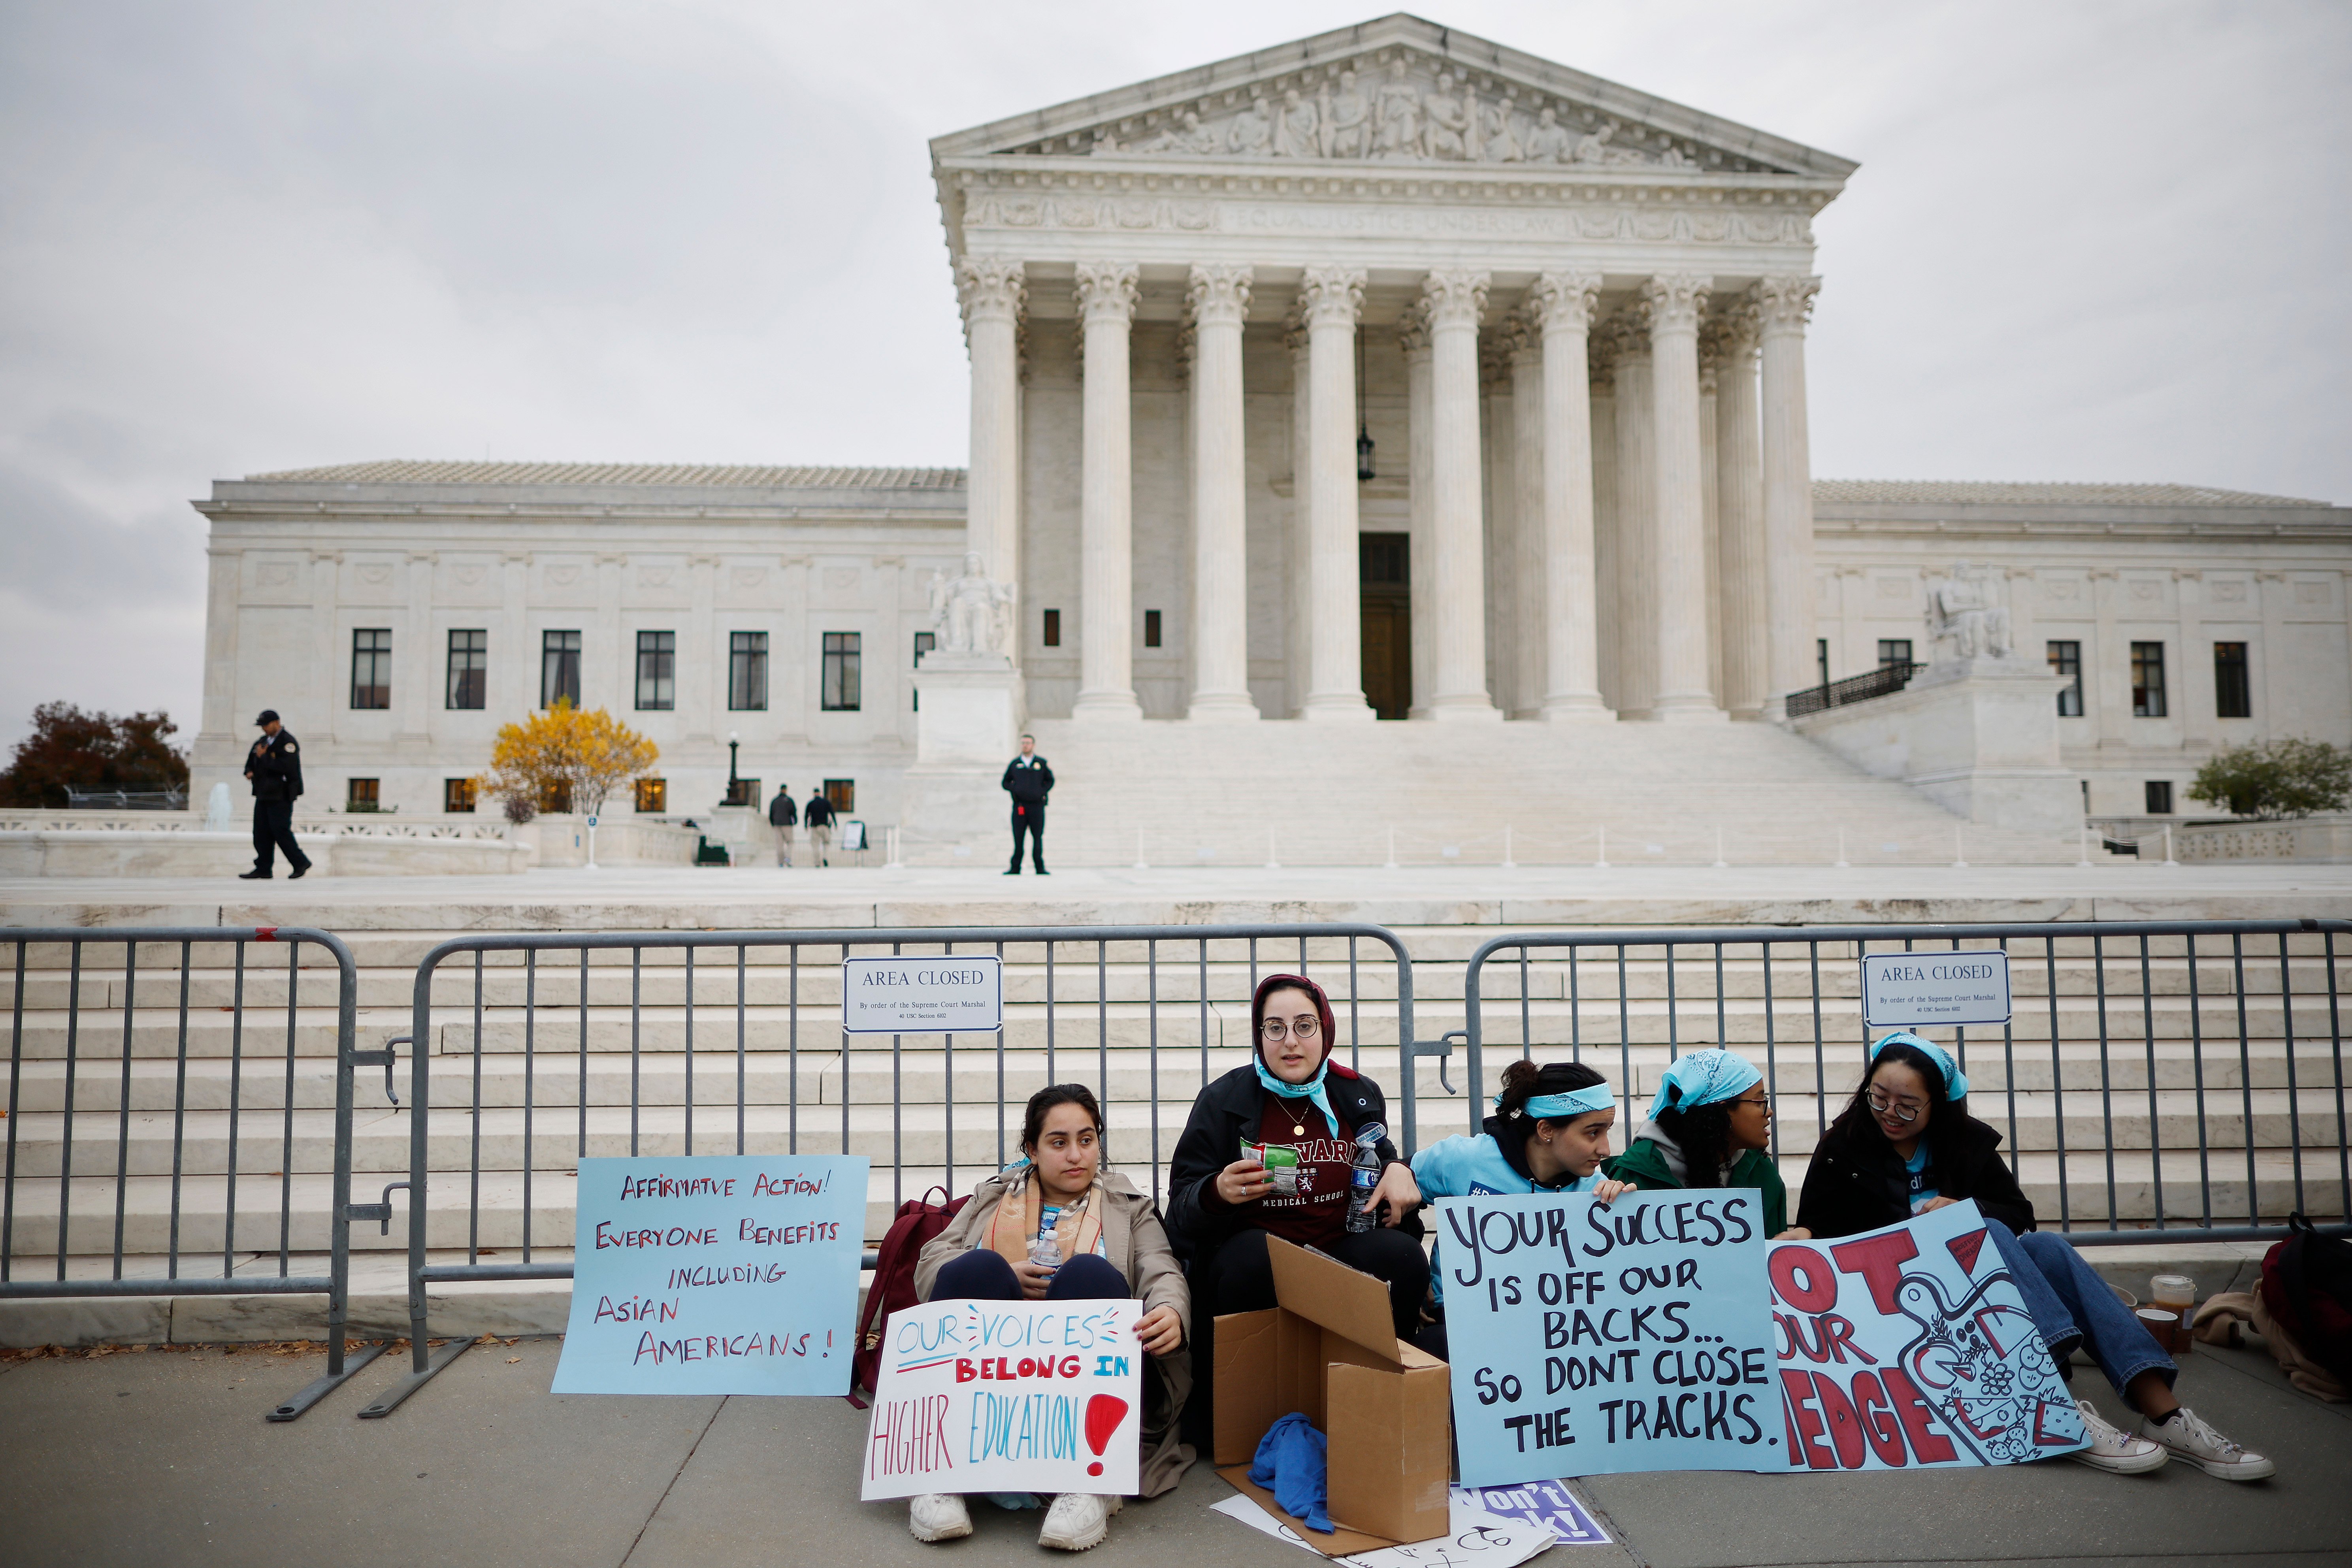 Students sit on the ground in front of the Supreme Court with signs supporting affirmative action.